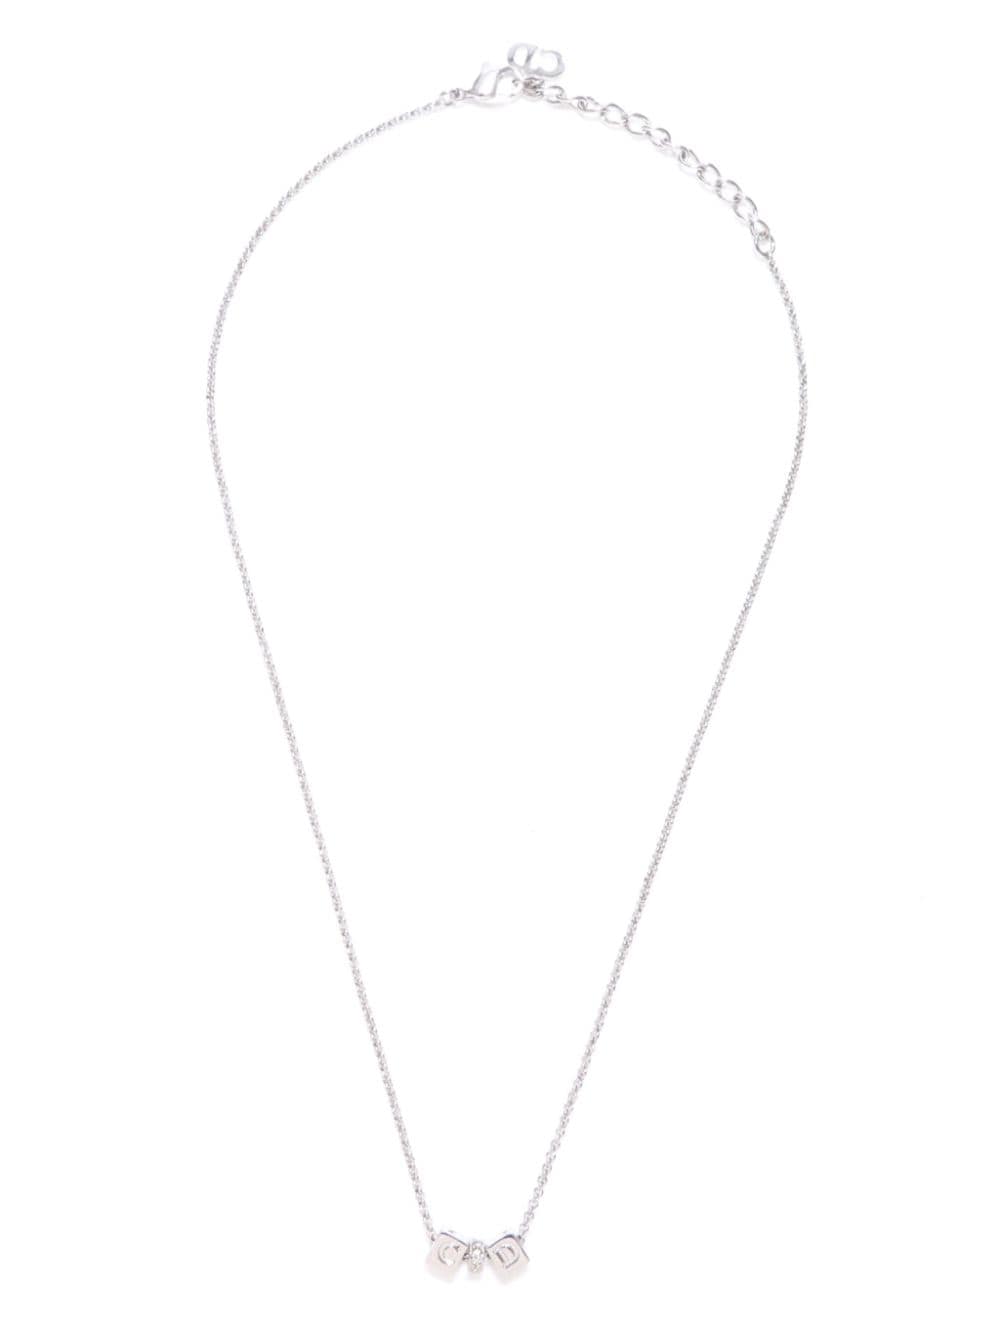 CD-charm chain necklace